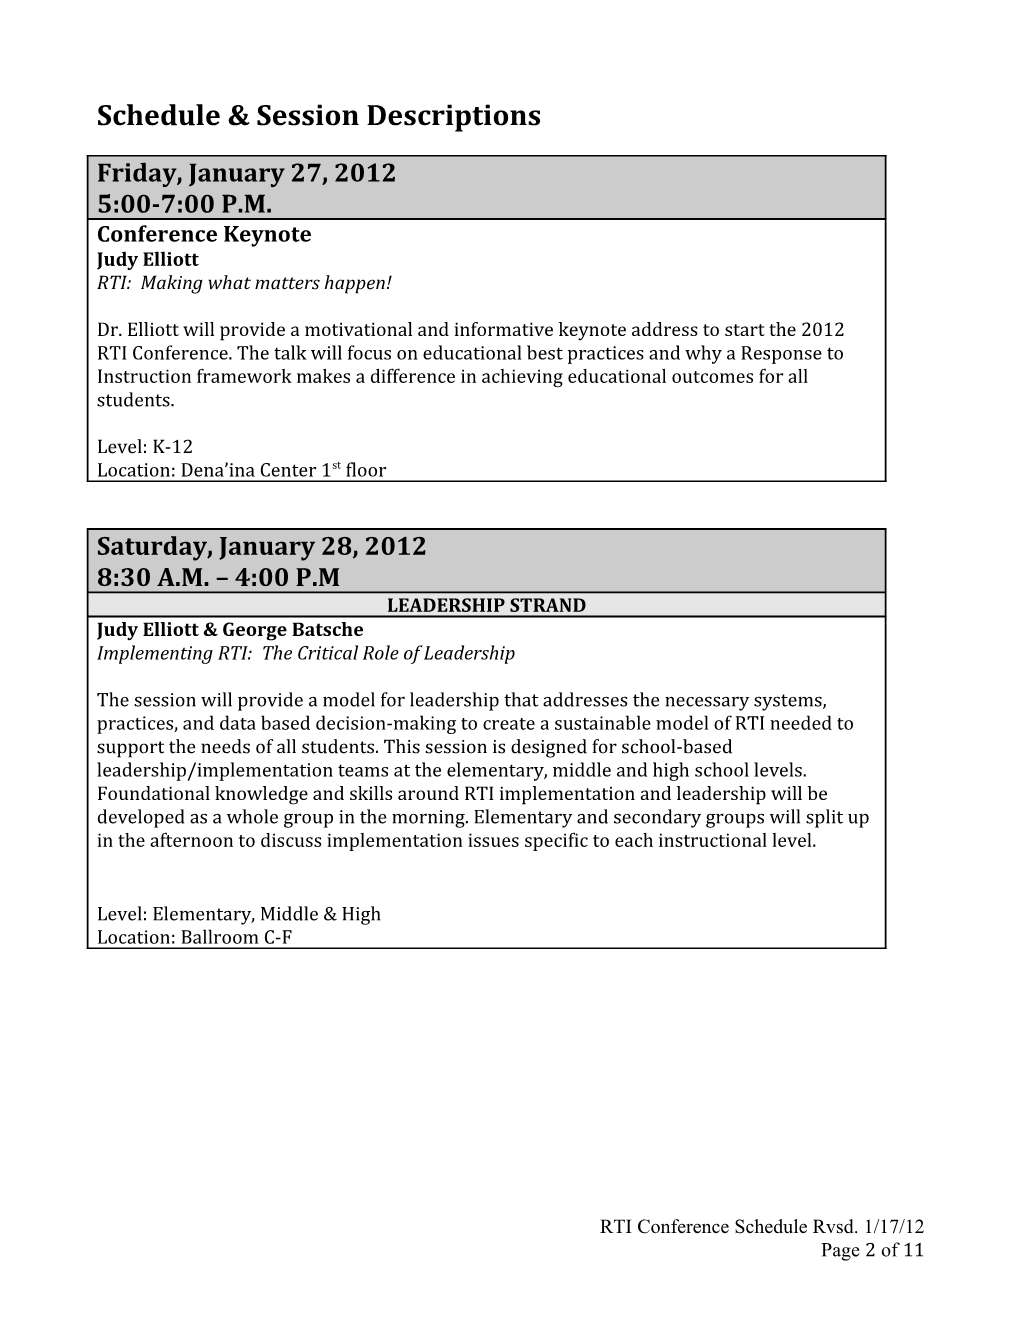 2012 RTI Conference Schedule